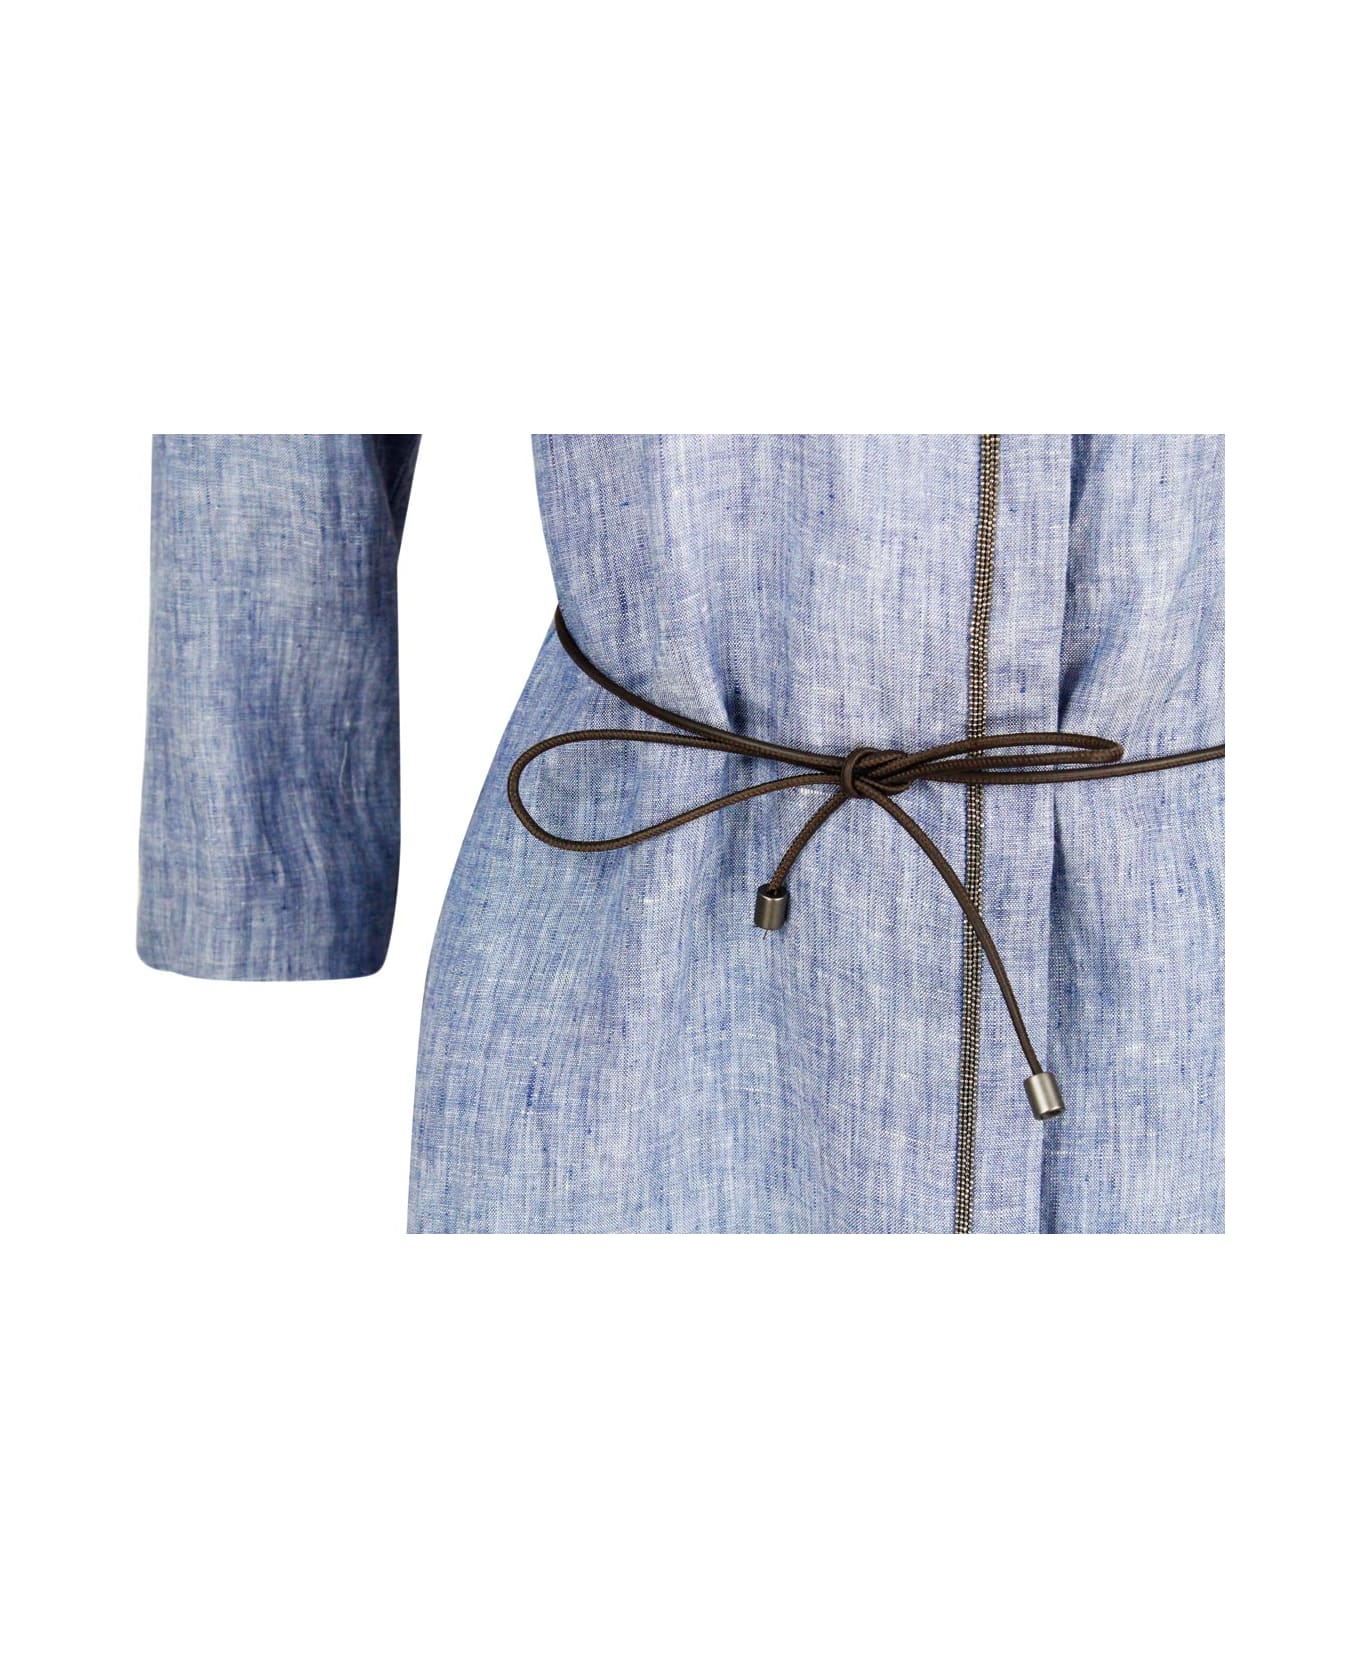 Fabiana Filippi Long Linen Shirt With Leather Belt And Embellished With Brilliant Jewels Along The Buttoning - BLUE JEANS